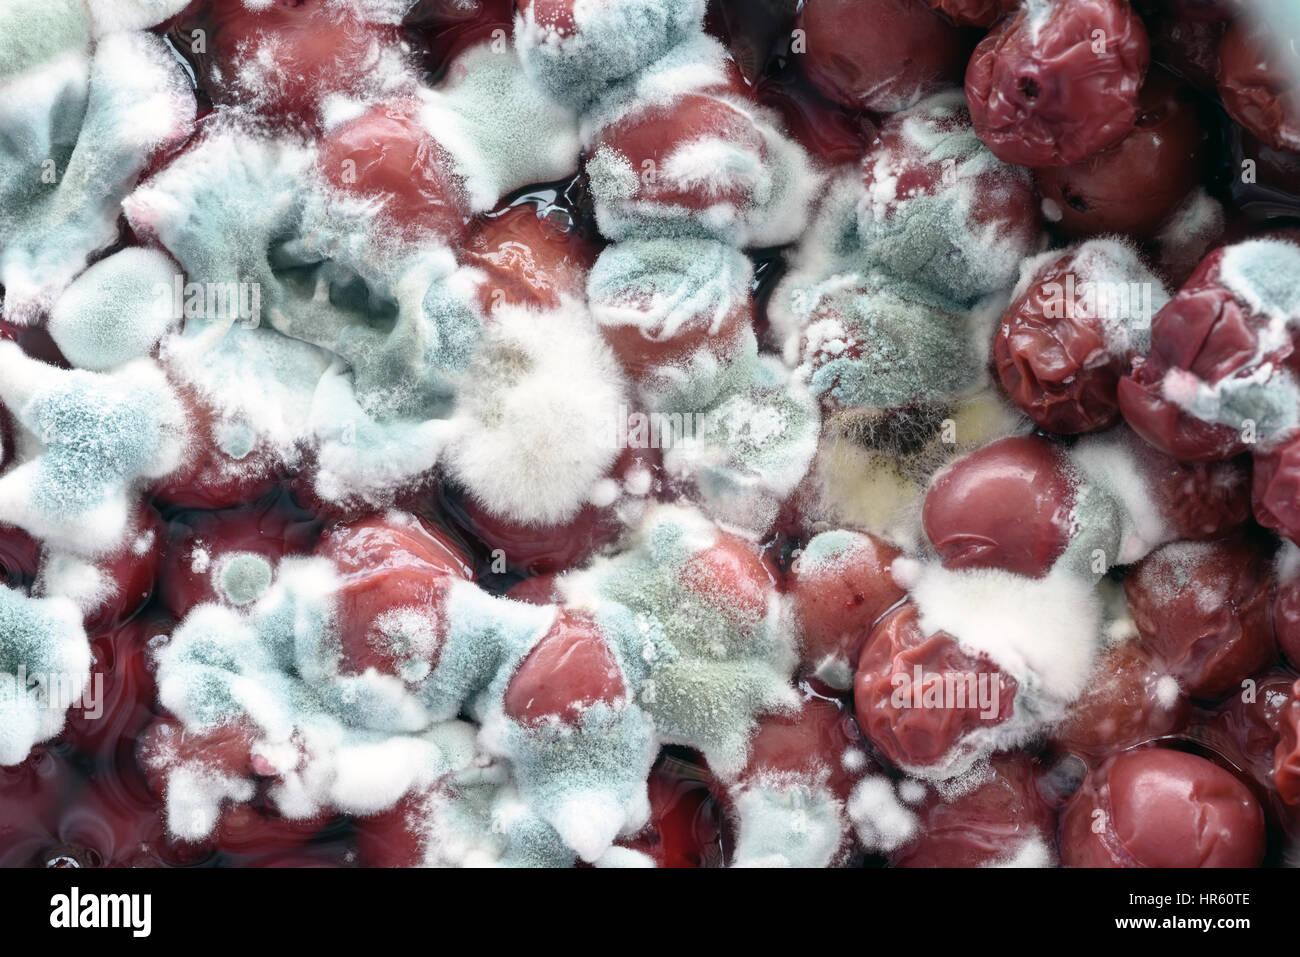 Rotten cherry fruits in natural juices covered with a fungal growth Stock Photo